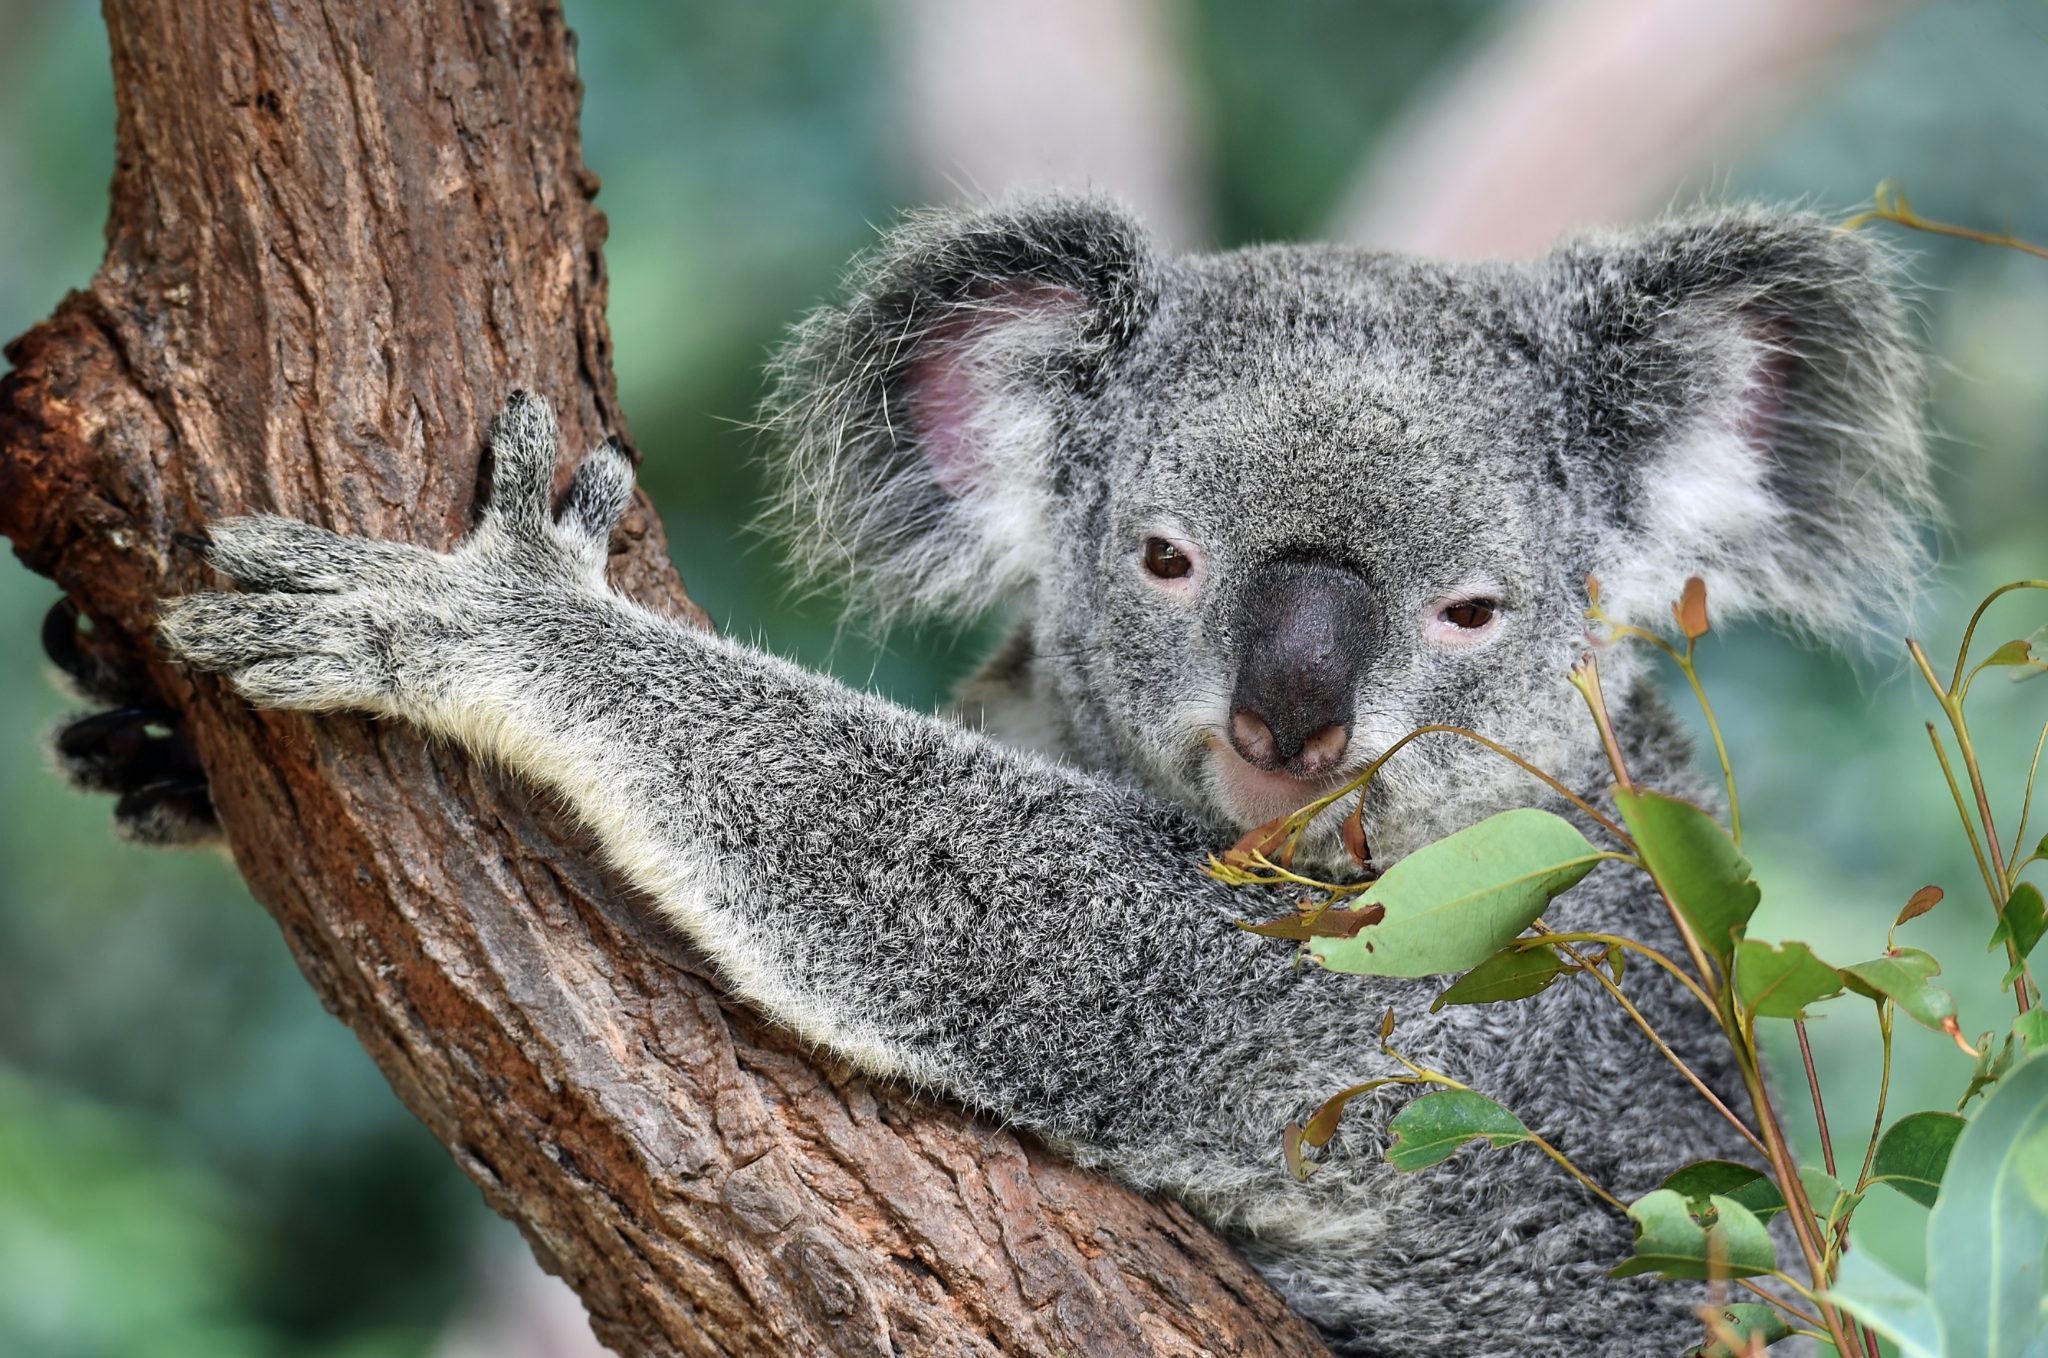 How To Help Australia's Wildlife During Fires | Photo by David Clode on Unsplash